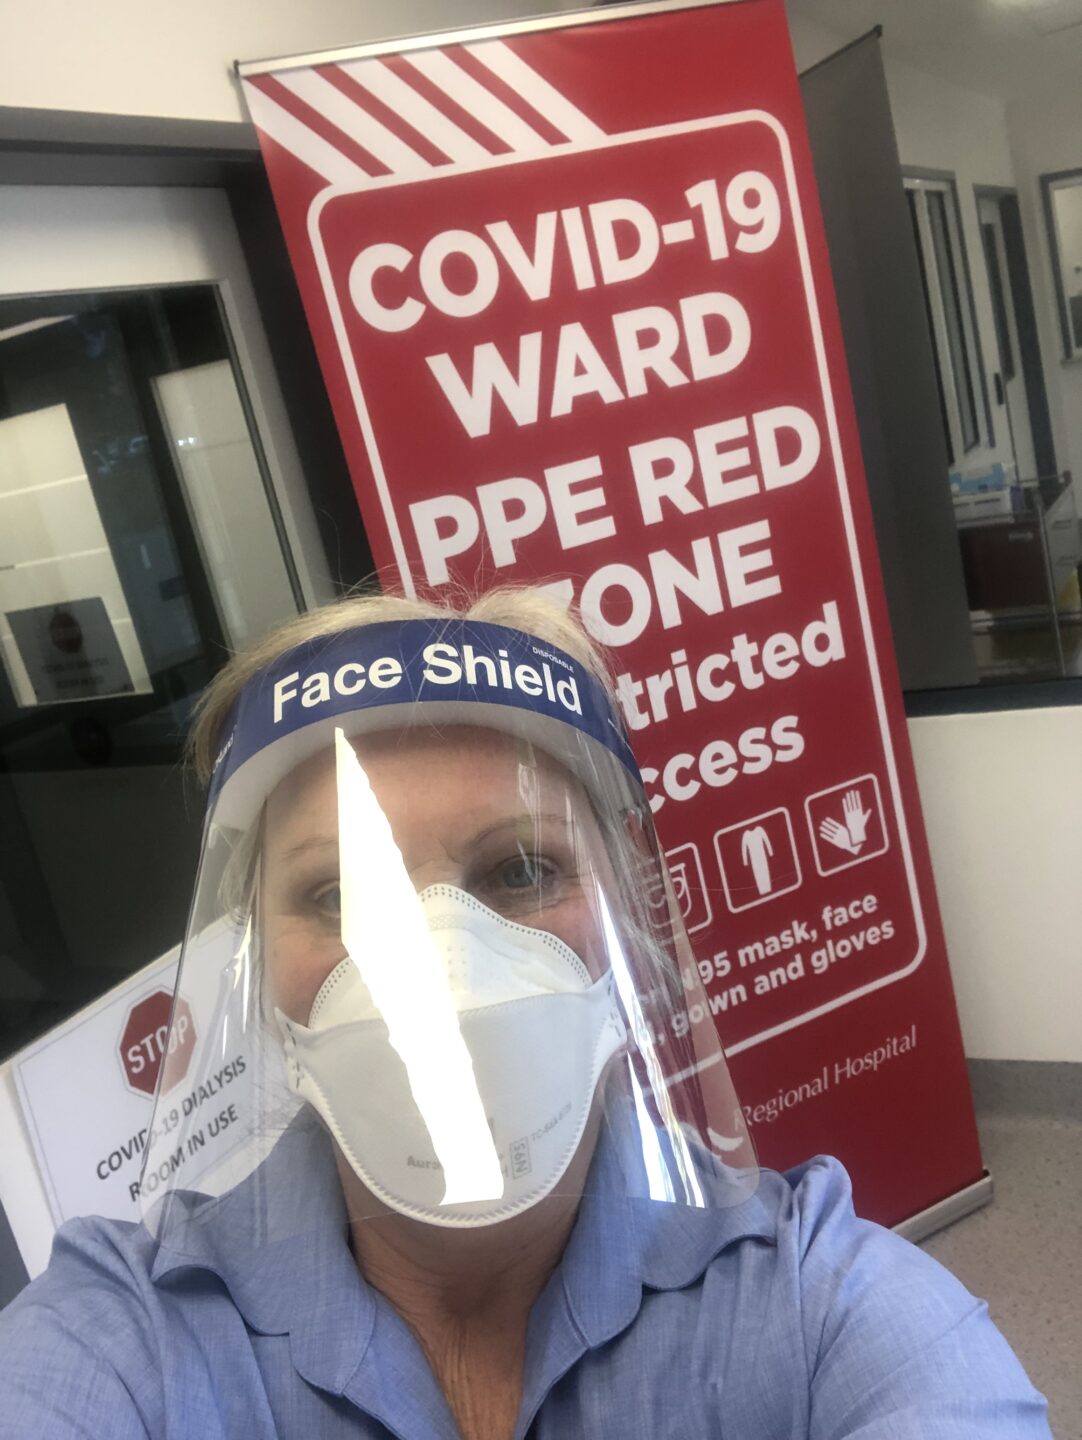 A photo of a nurse in full PPE in front of a red sign that says 'COVID-19 WARD PPE RED ZONE'